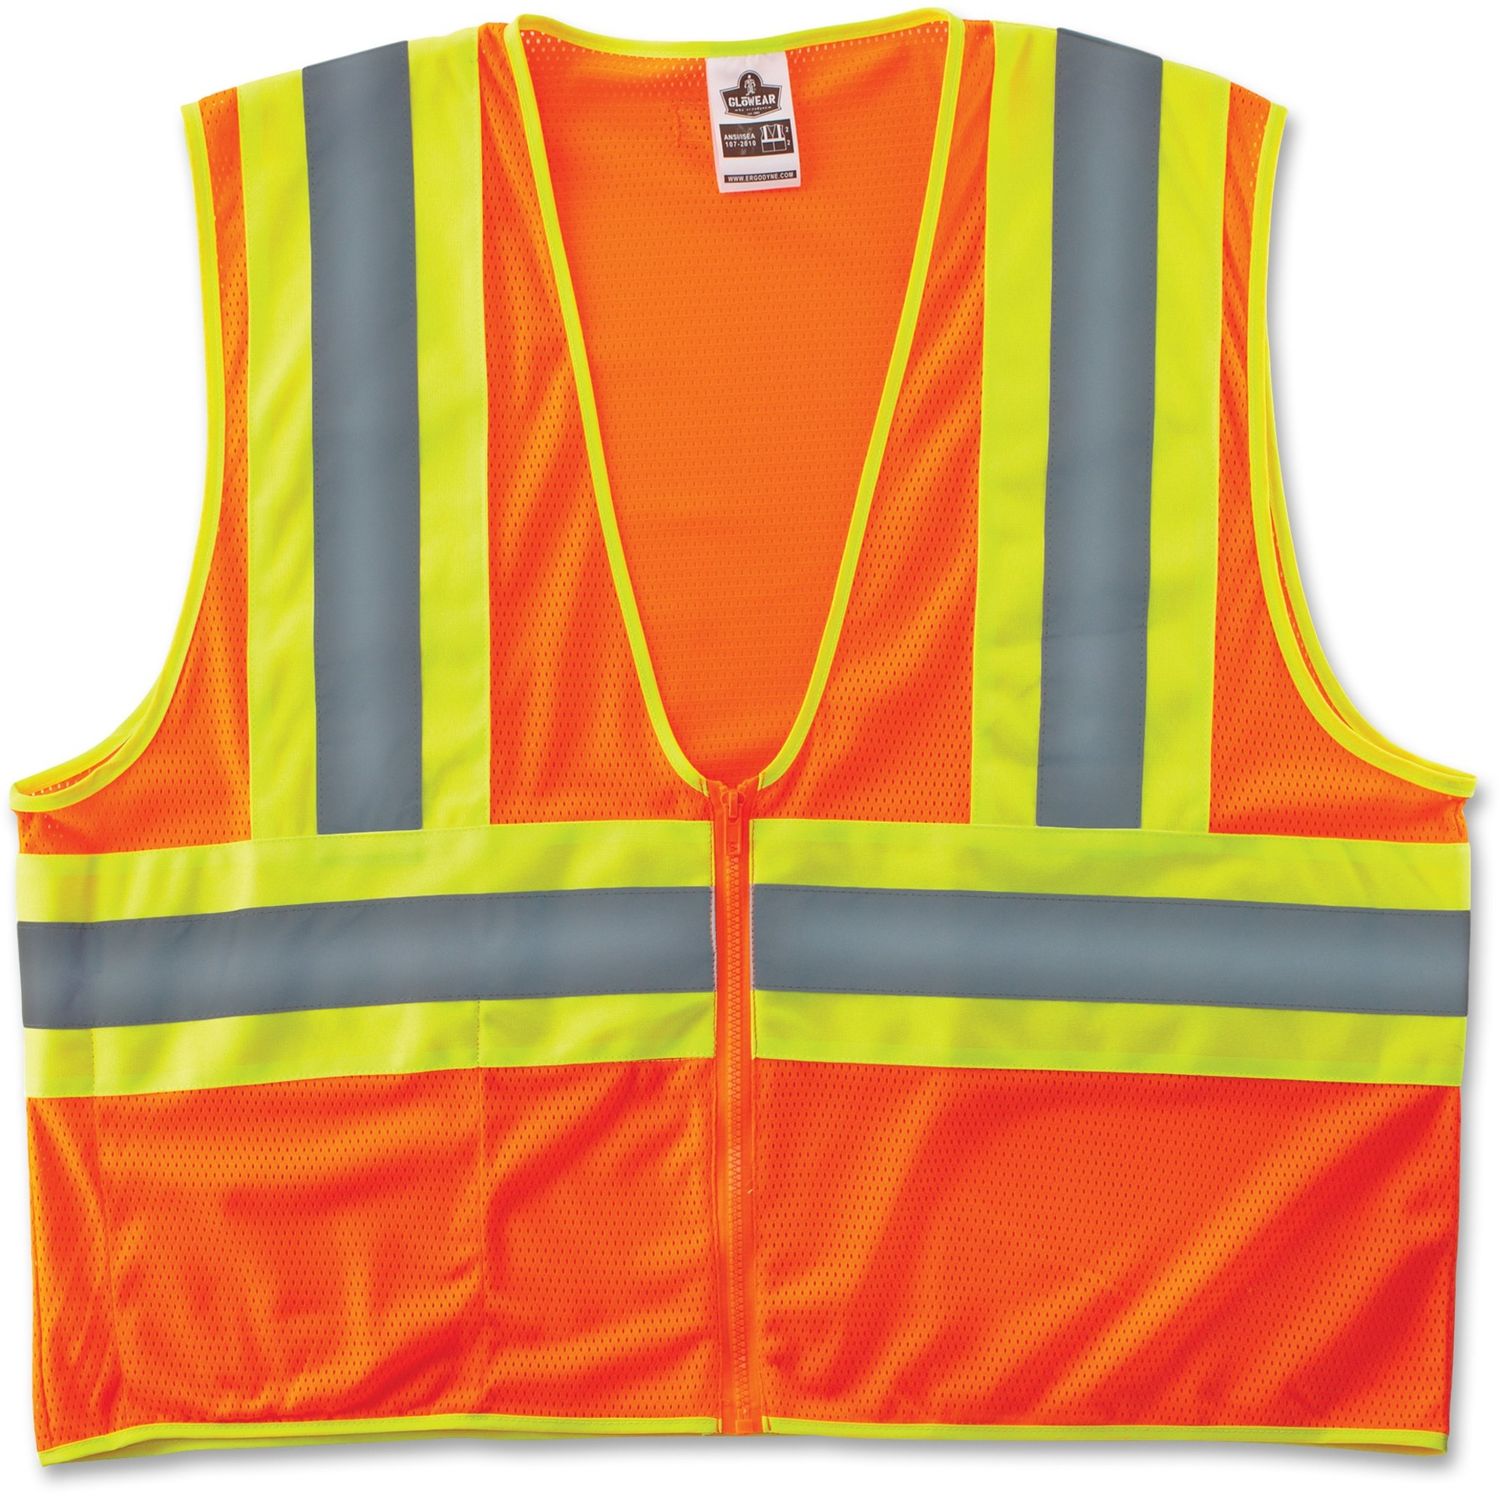 Class 2 Two-tone Orange Vest Recommended for: Construction, Reflective, Machine Washable, Lightweight, Zipper Closure, Pocket, High Visibility, Large/Extra Large Size, Zipper Closure